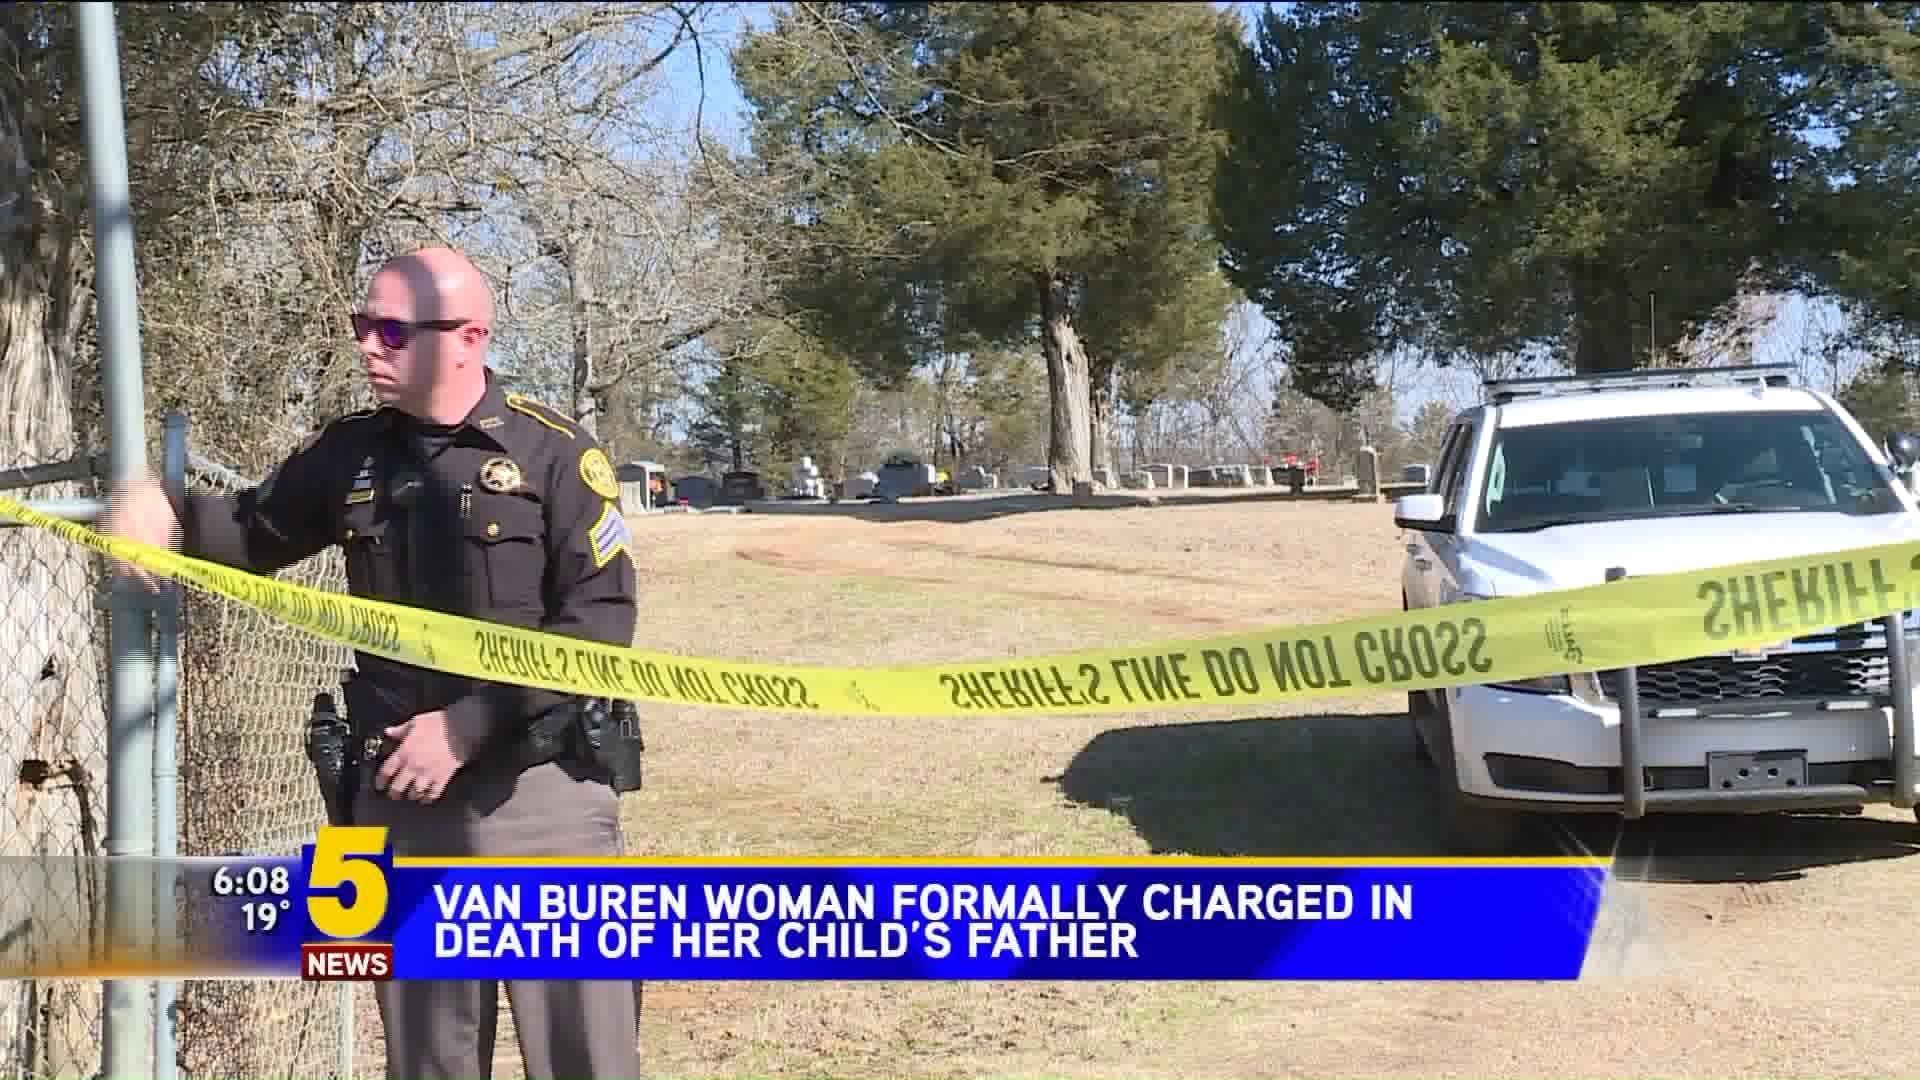 Van Buren Woman Formally Charged In Death Of Her Child`s Father